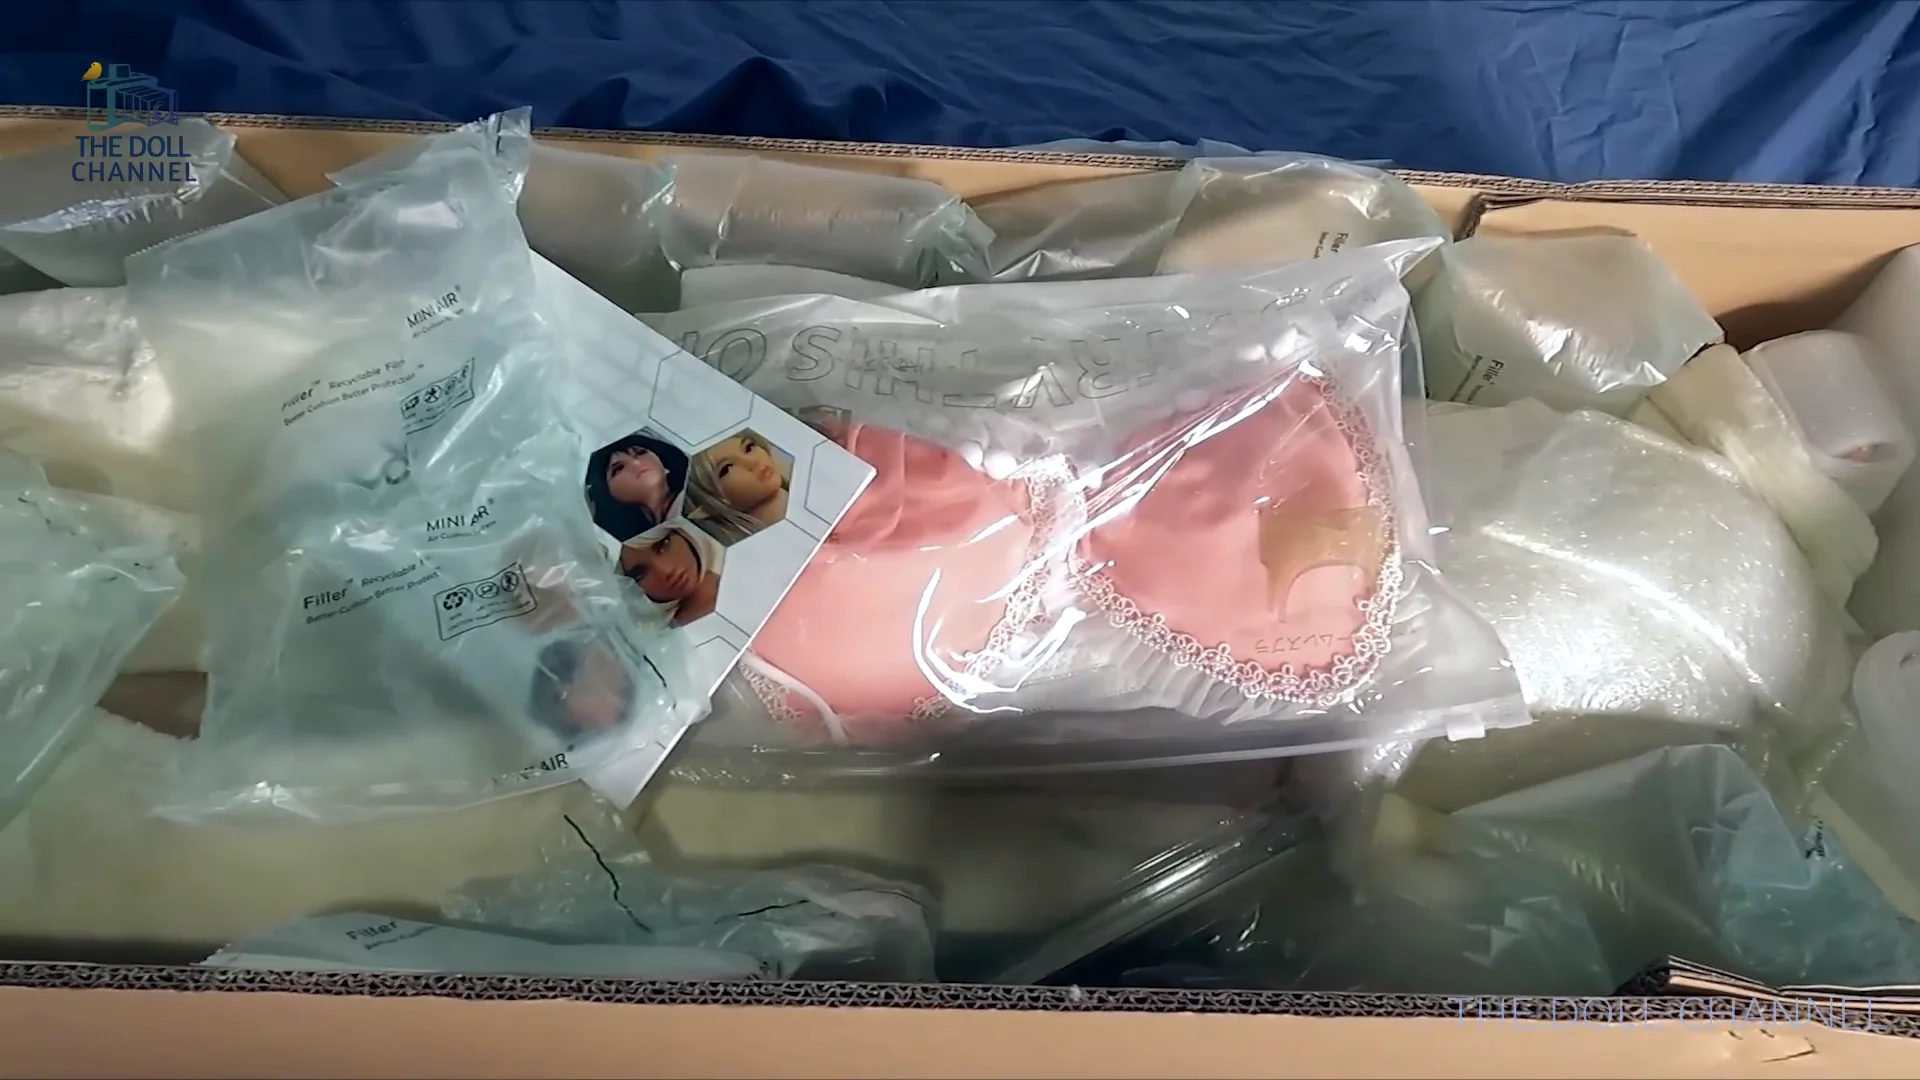 Dollhouse 168 128 cm EVO Molly Doll Unboxing and Review on Vimeo